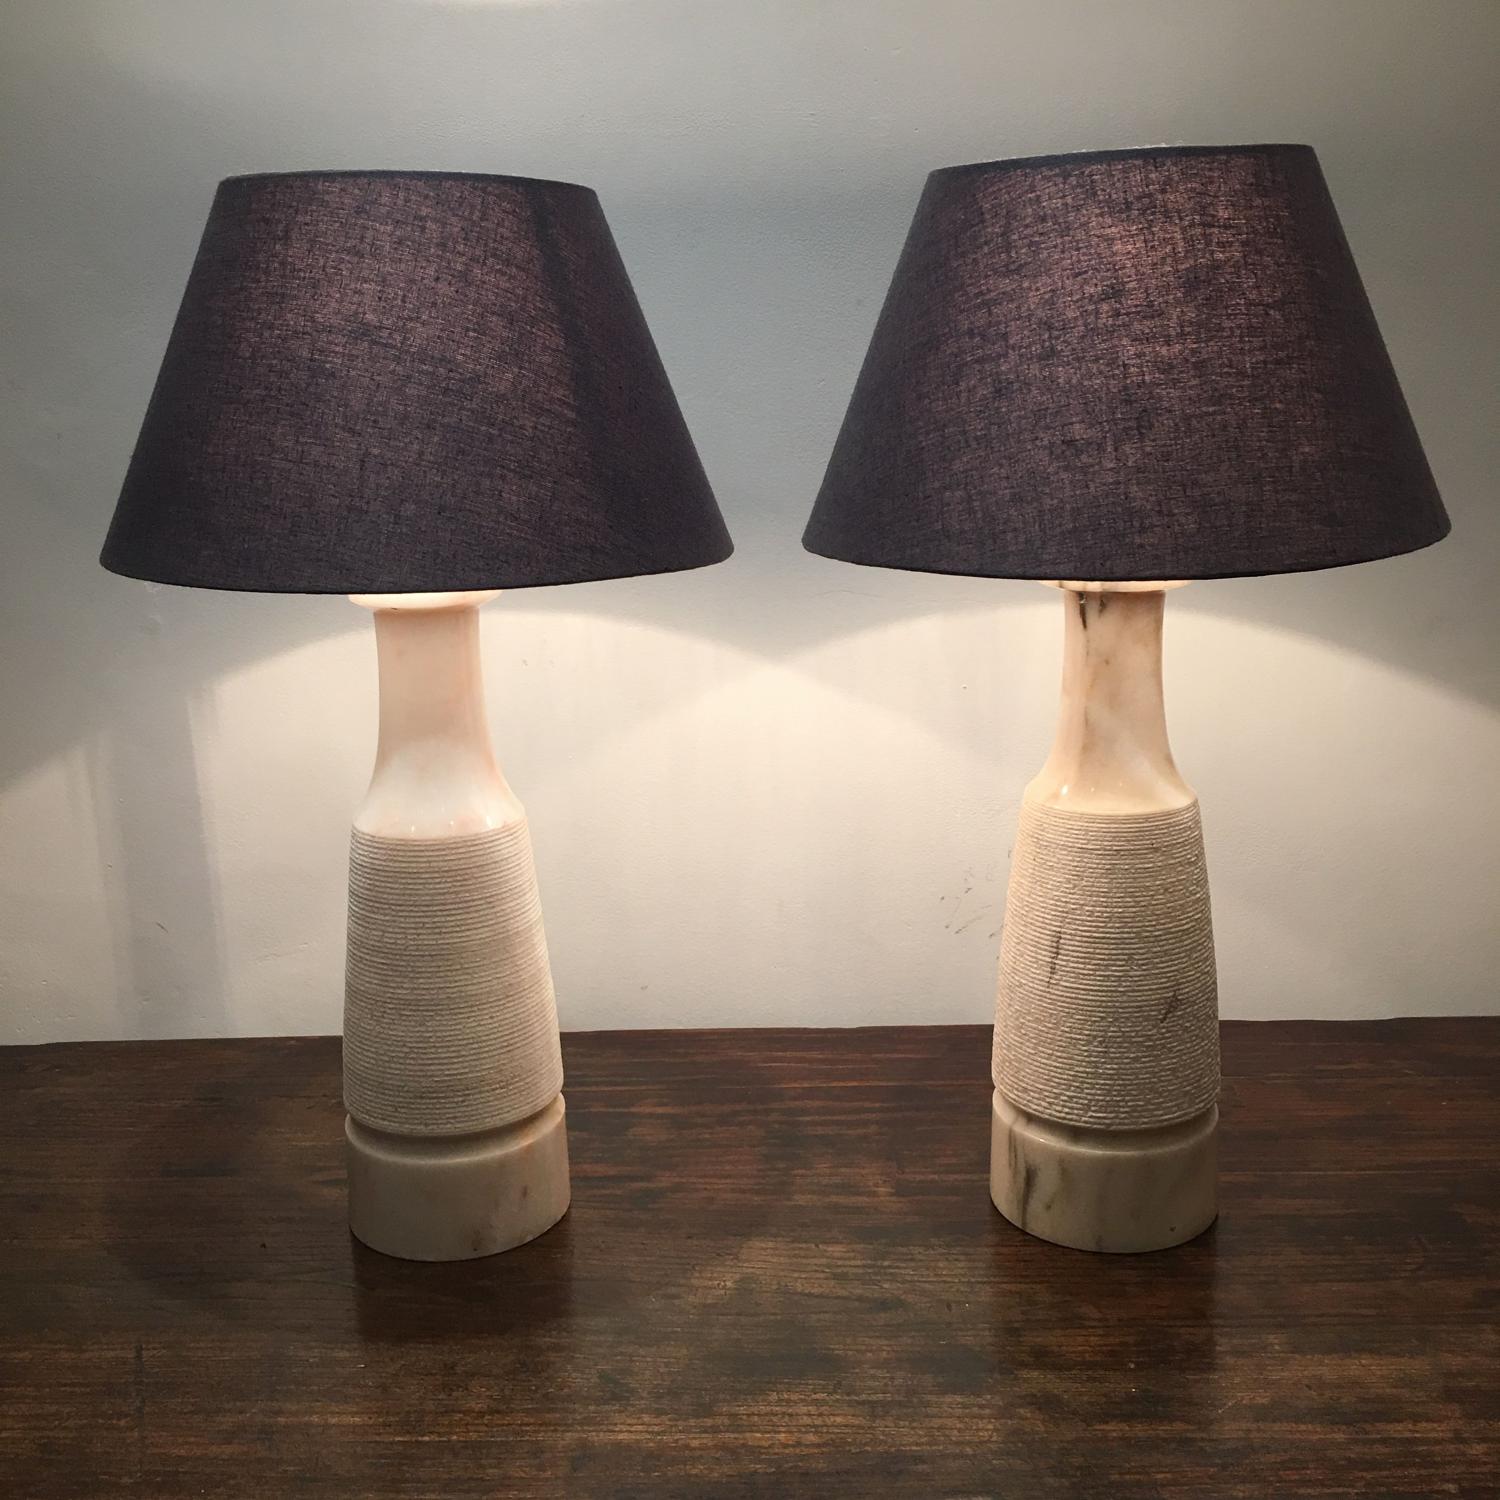 A pair of Marble Table Lamps